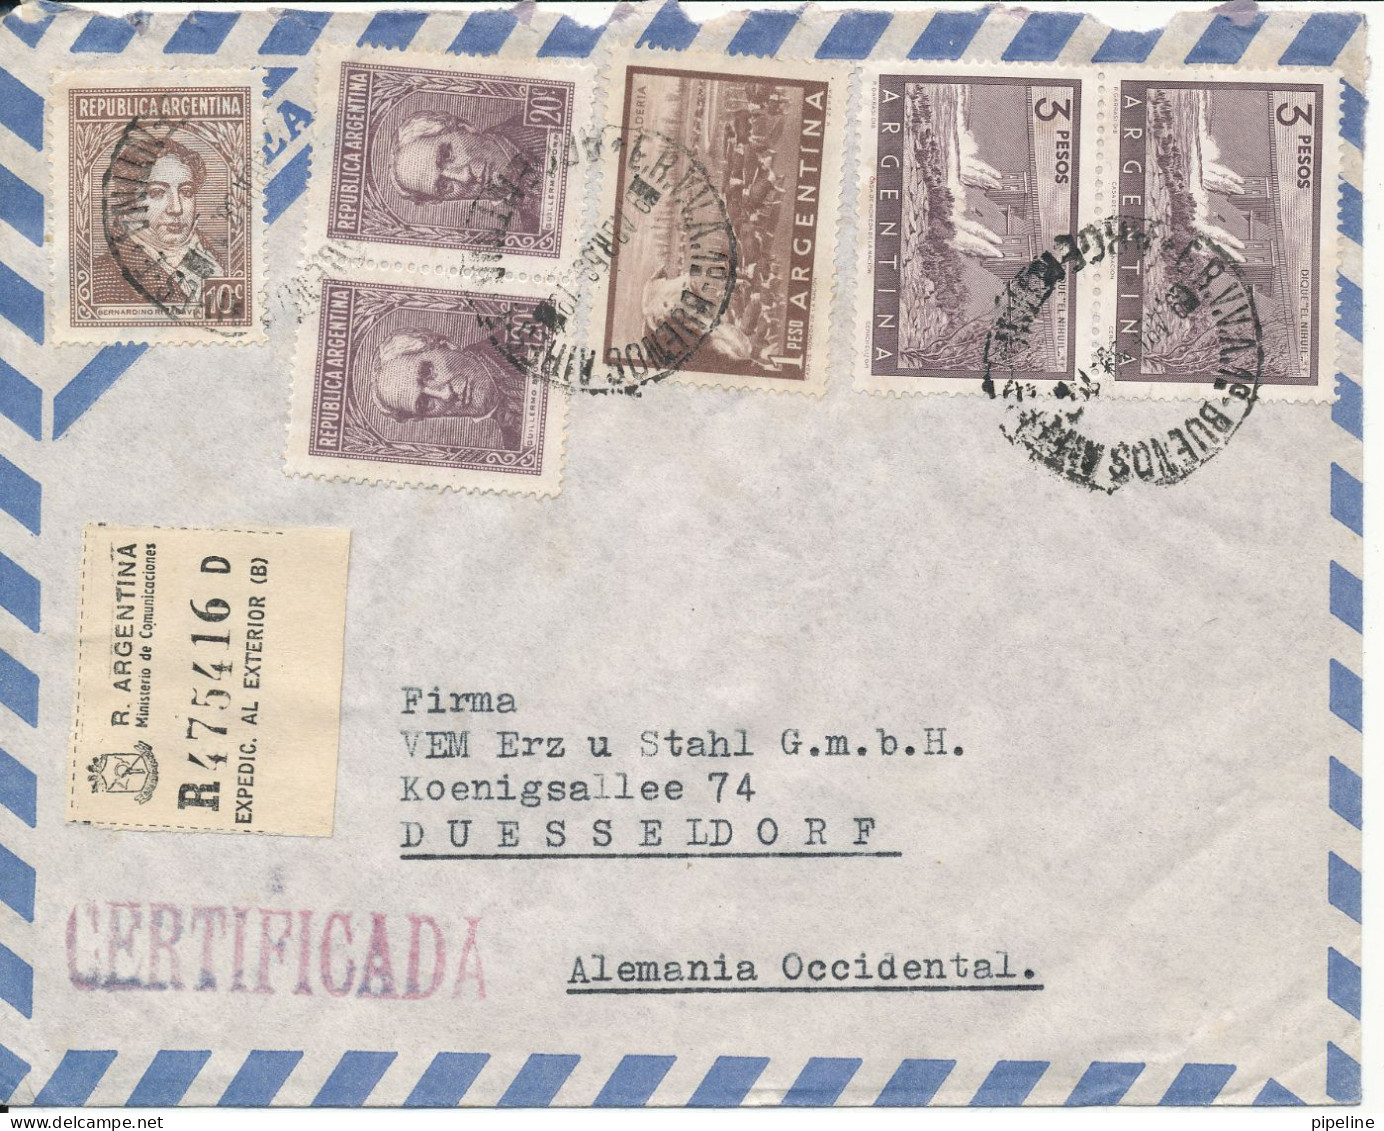 Argentina Registered Air Mail Cover Sent To Germany 9-4-1956 With More Stamps - Luftpost